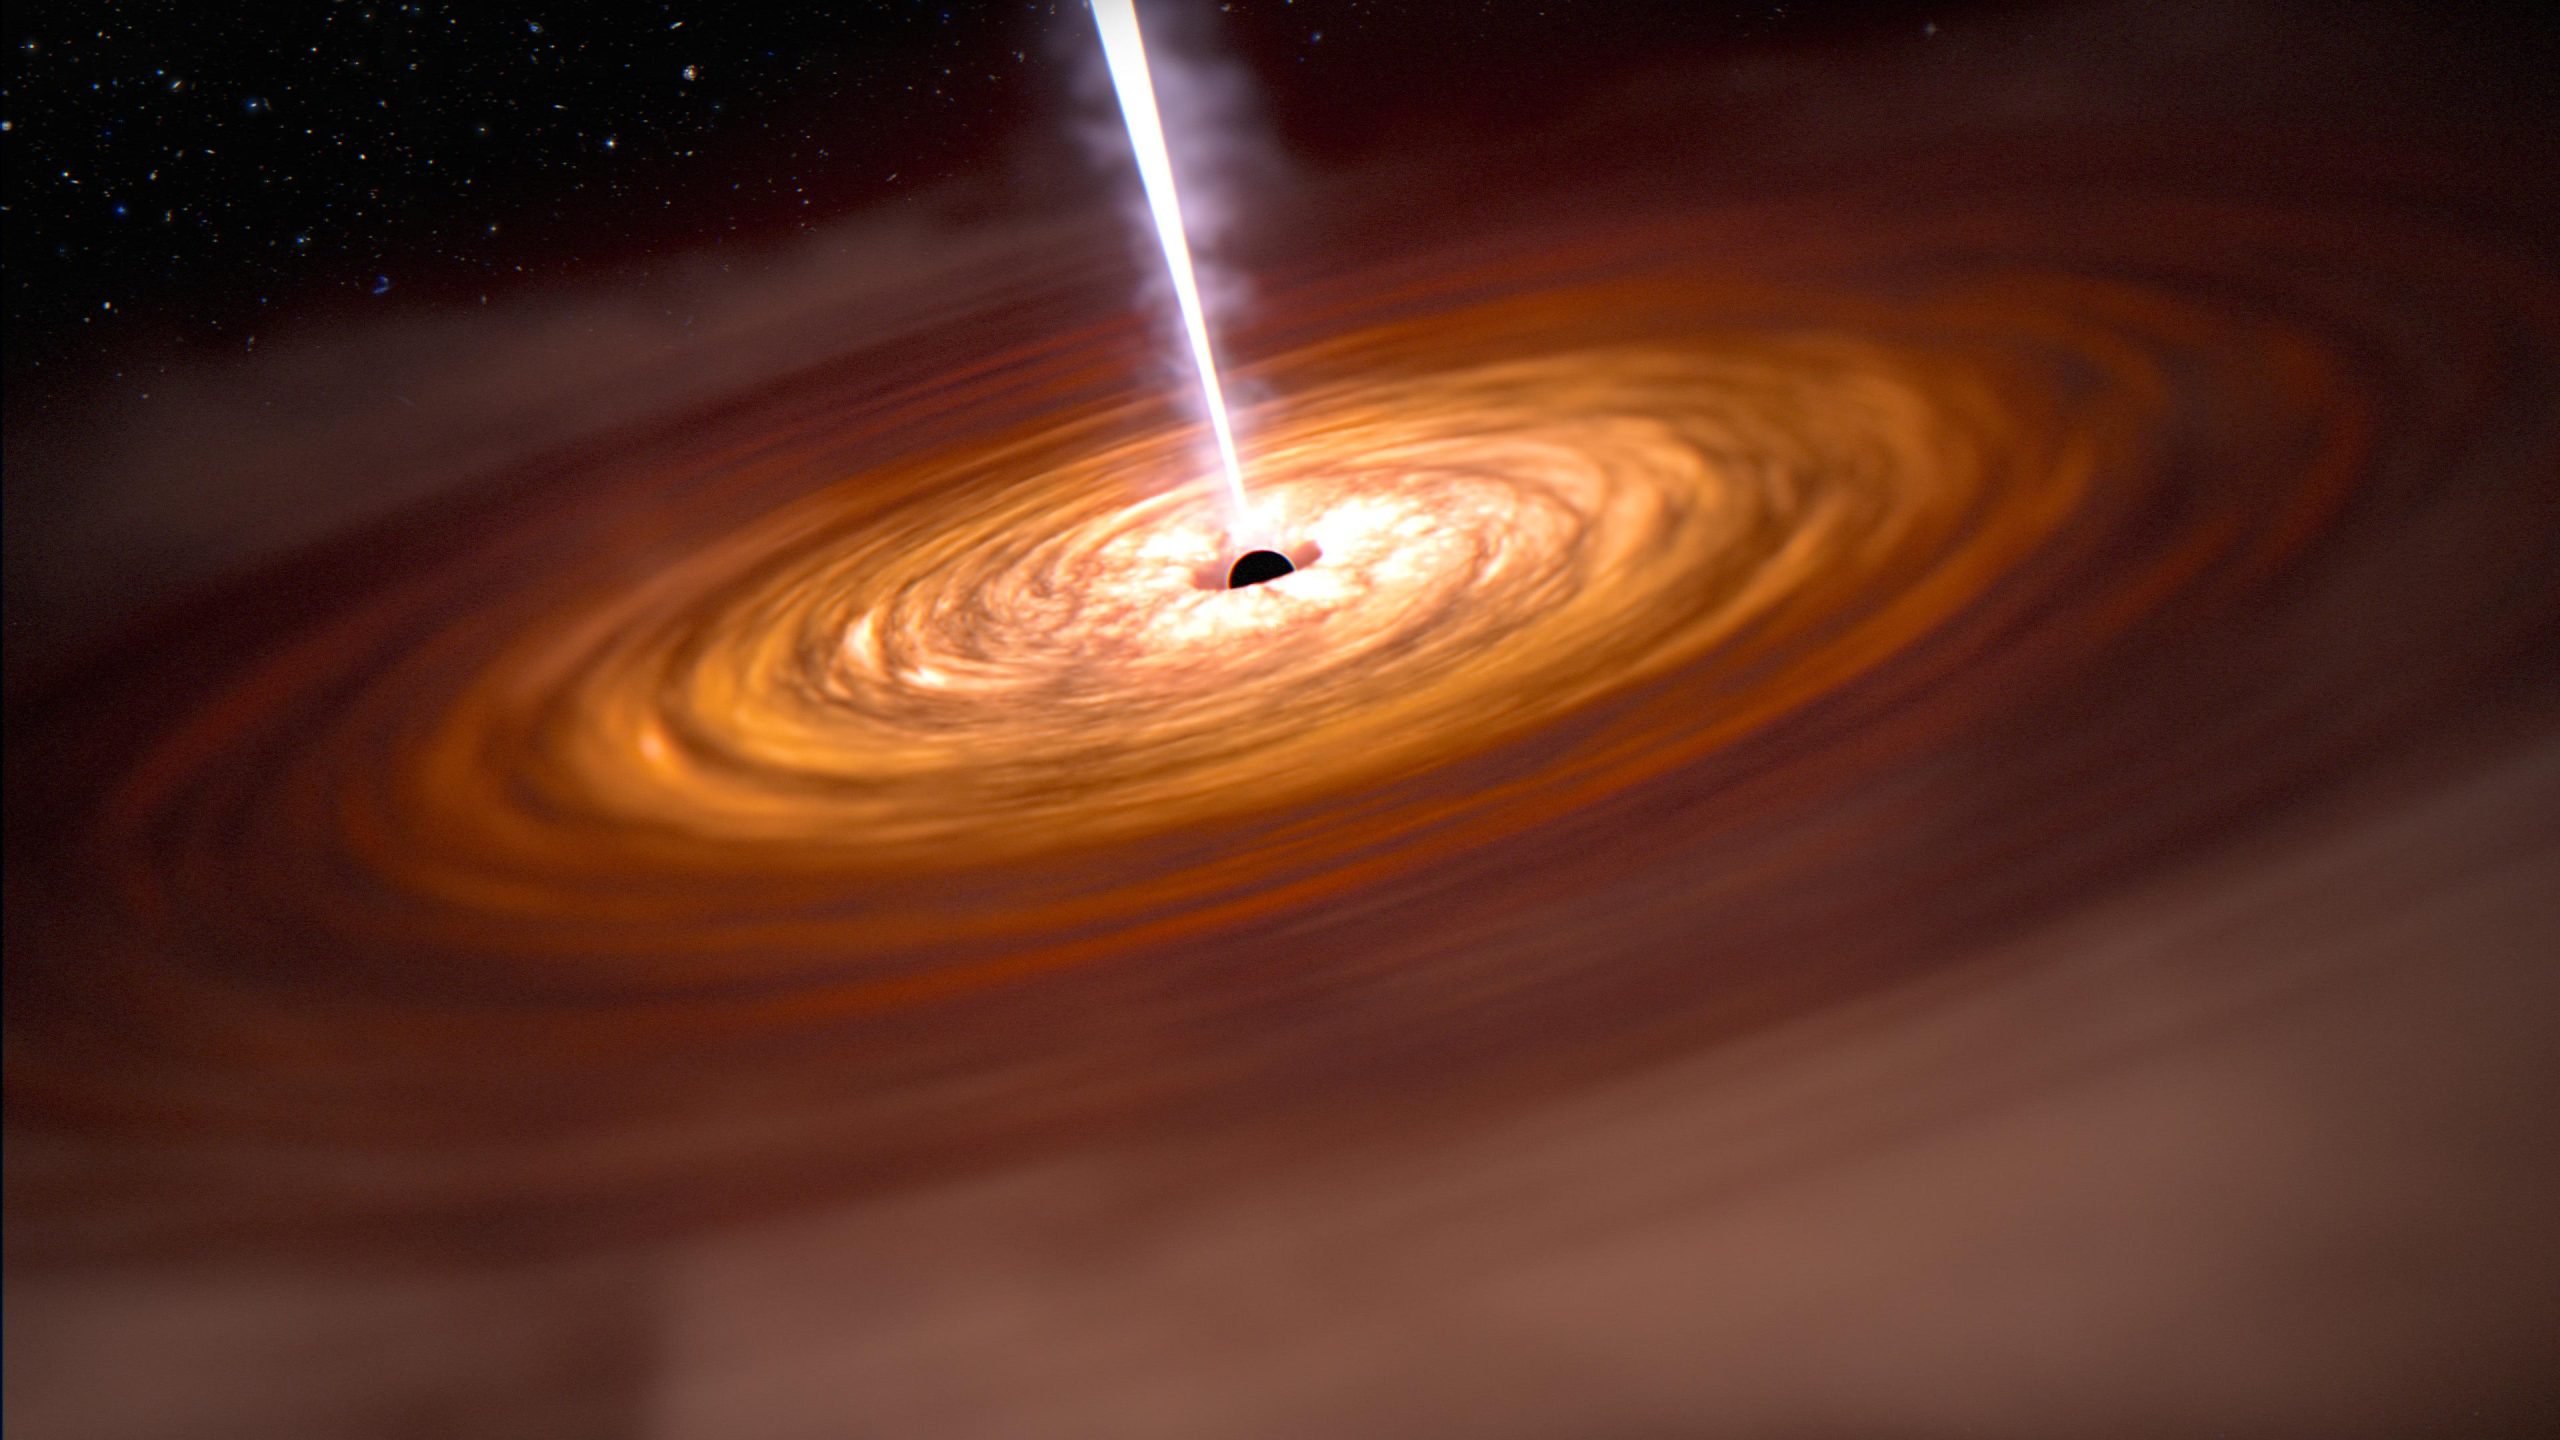 Scouting Active Supermassive Black Holes With NASA's Webb Space Telescope